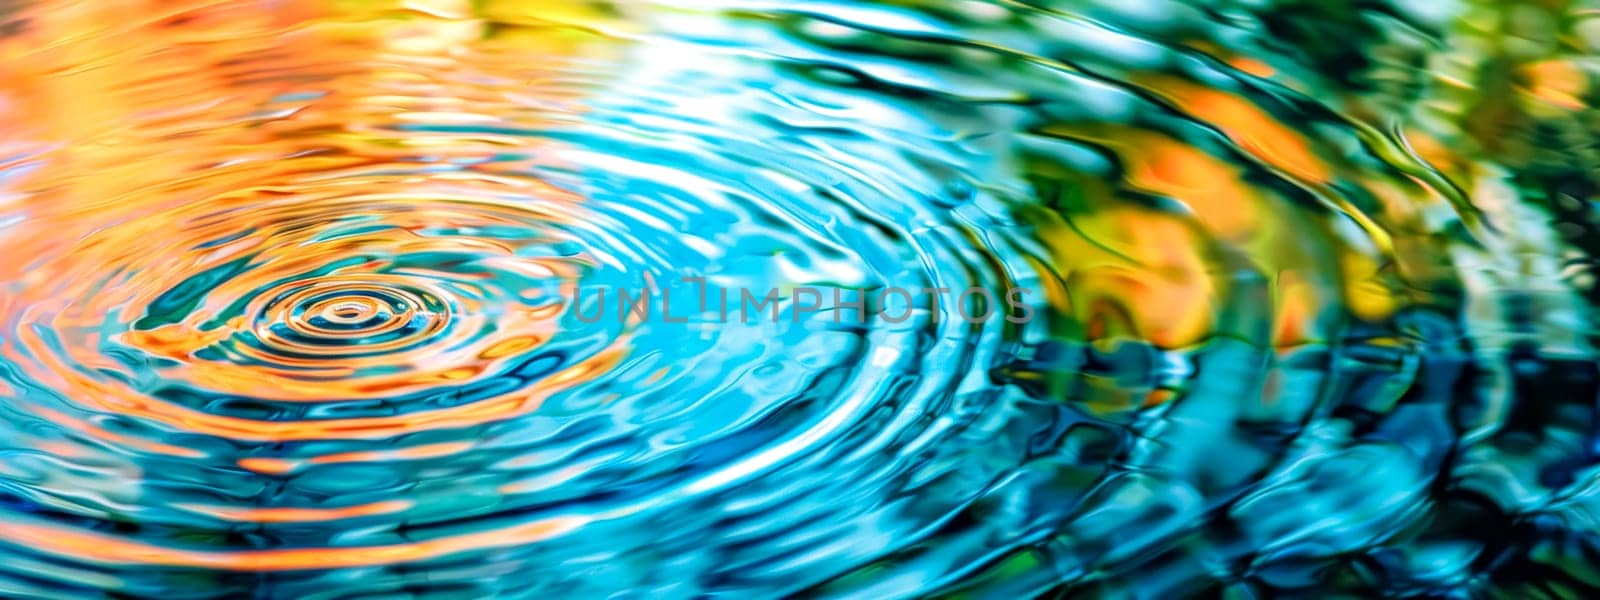 Abstract image of colorful ripples in water, with a play of light and shadow